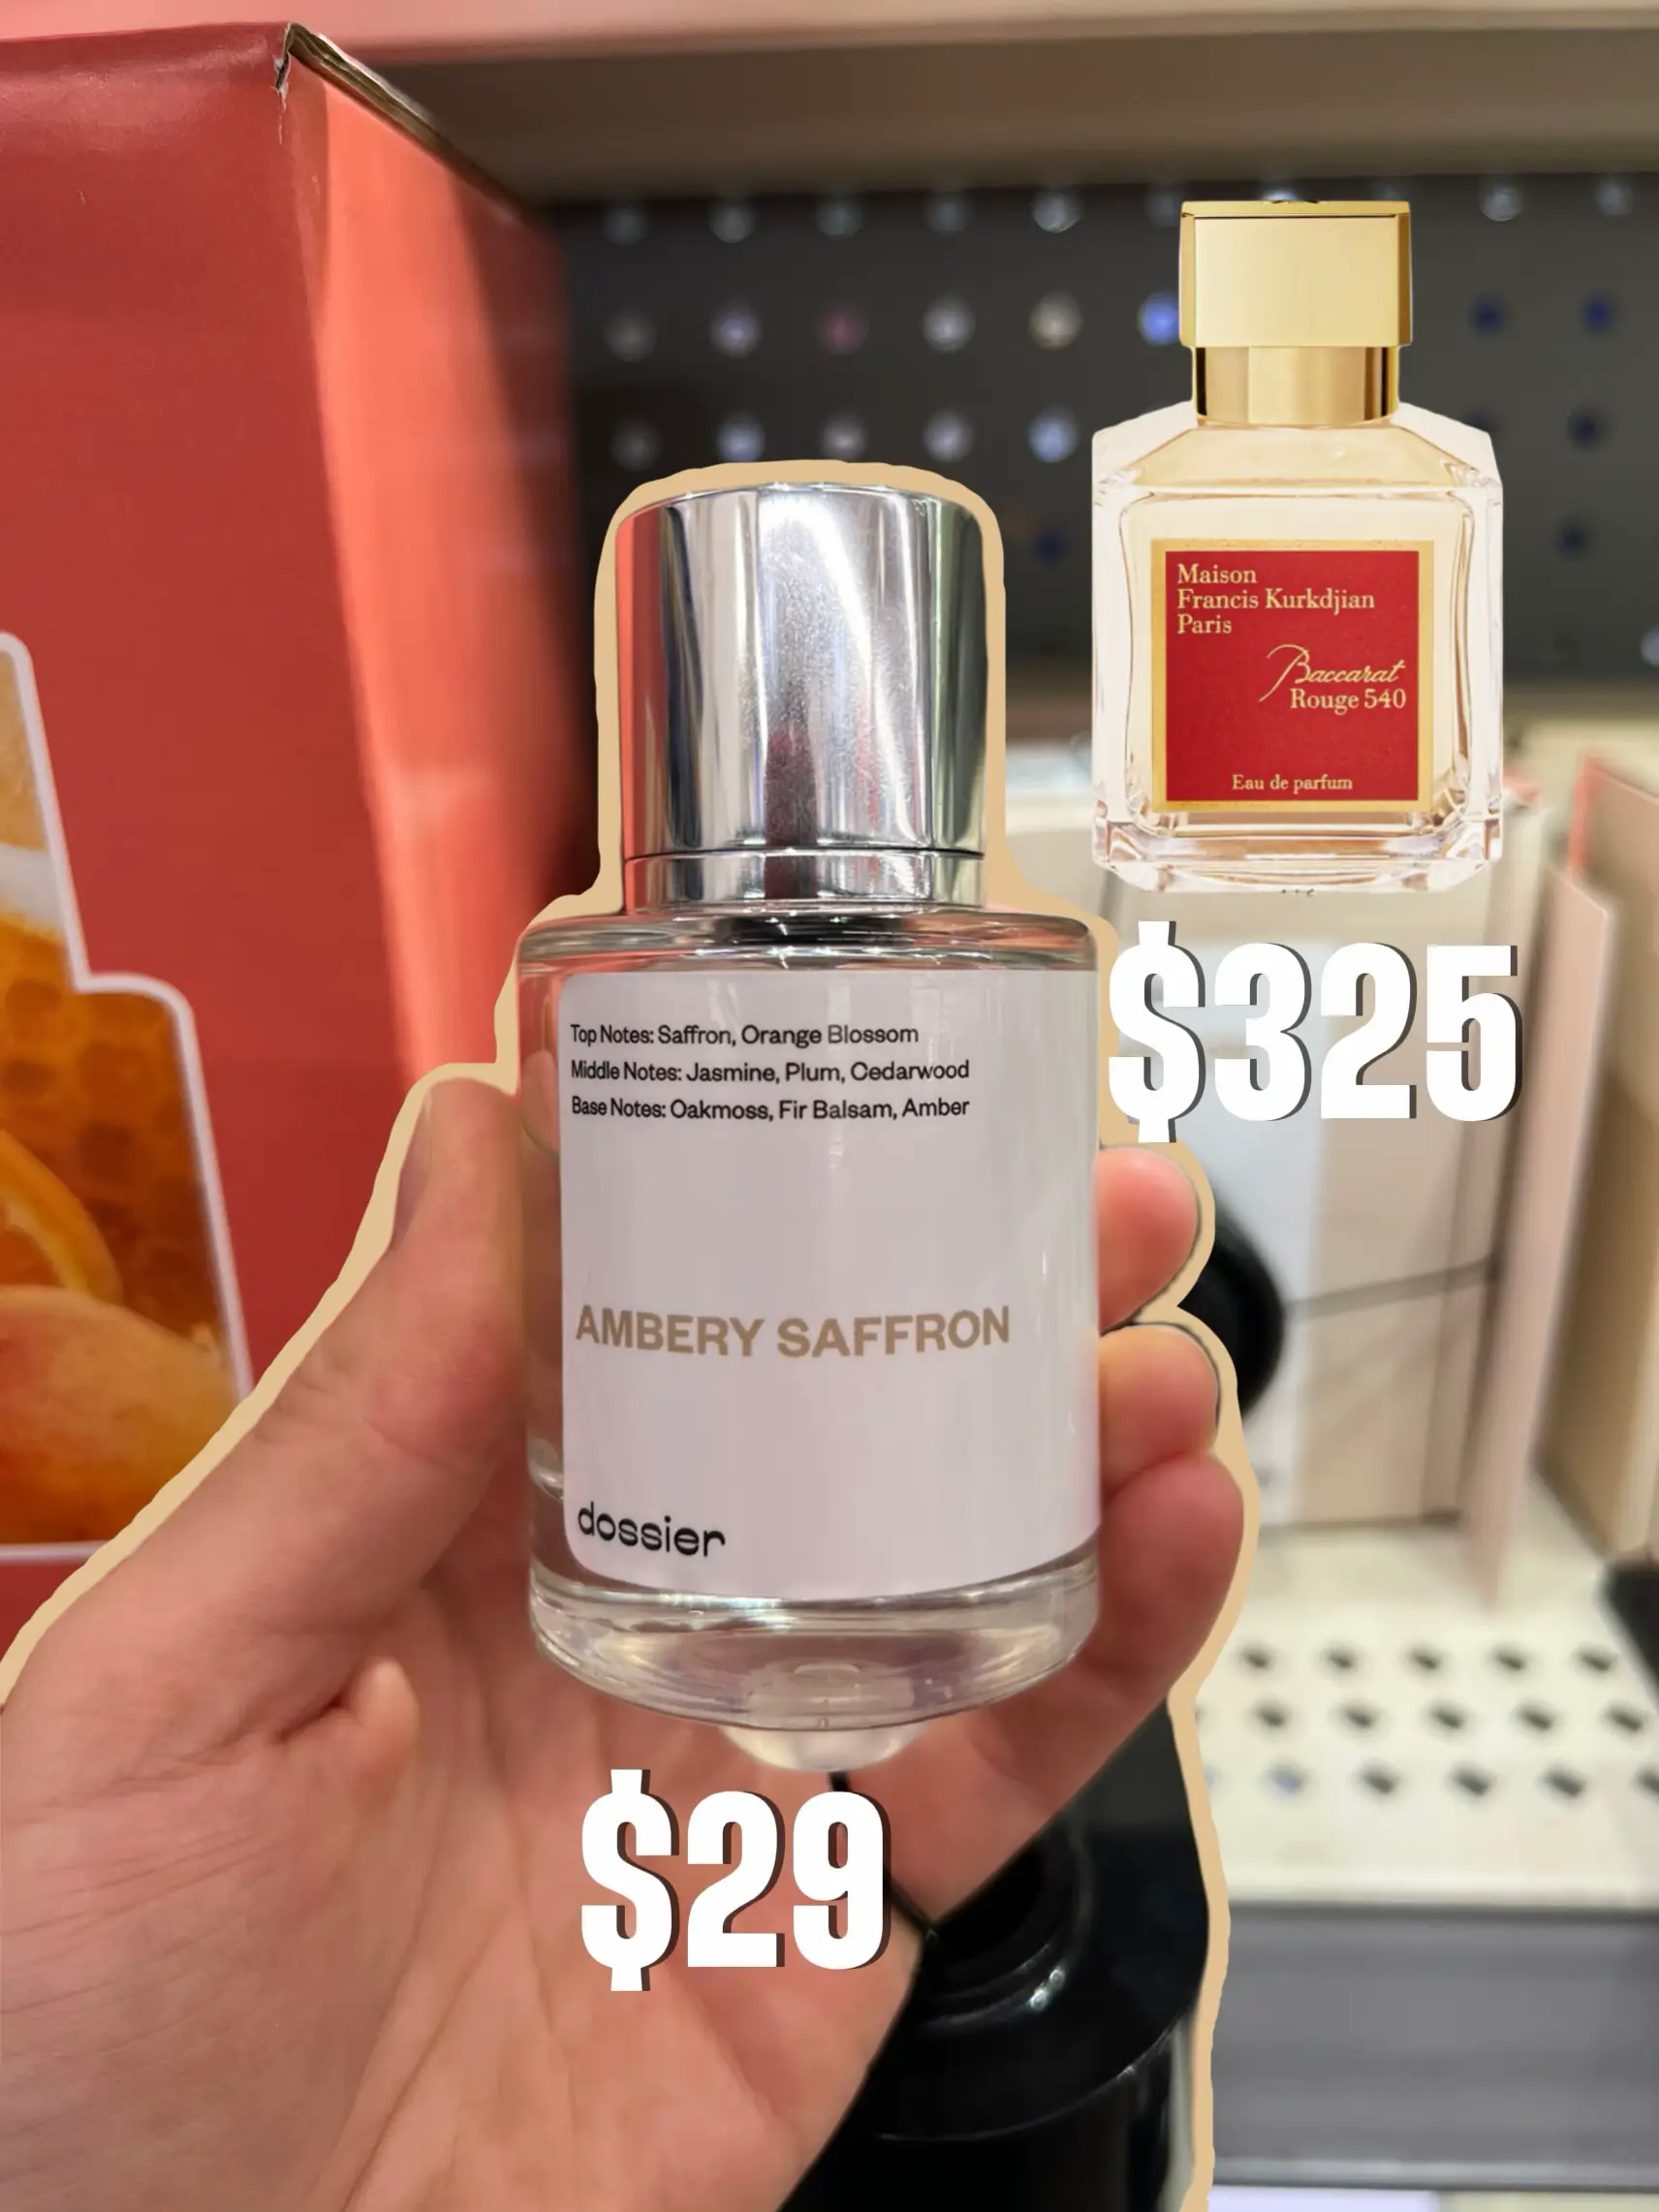 Zara Perfumes Dupes: The Affordable Dupes Of Designer Fragrances That Won't  Break The Bank